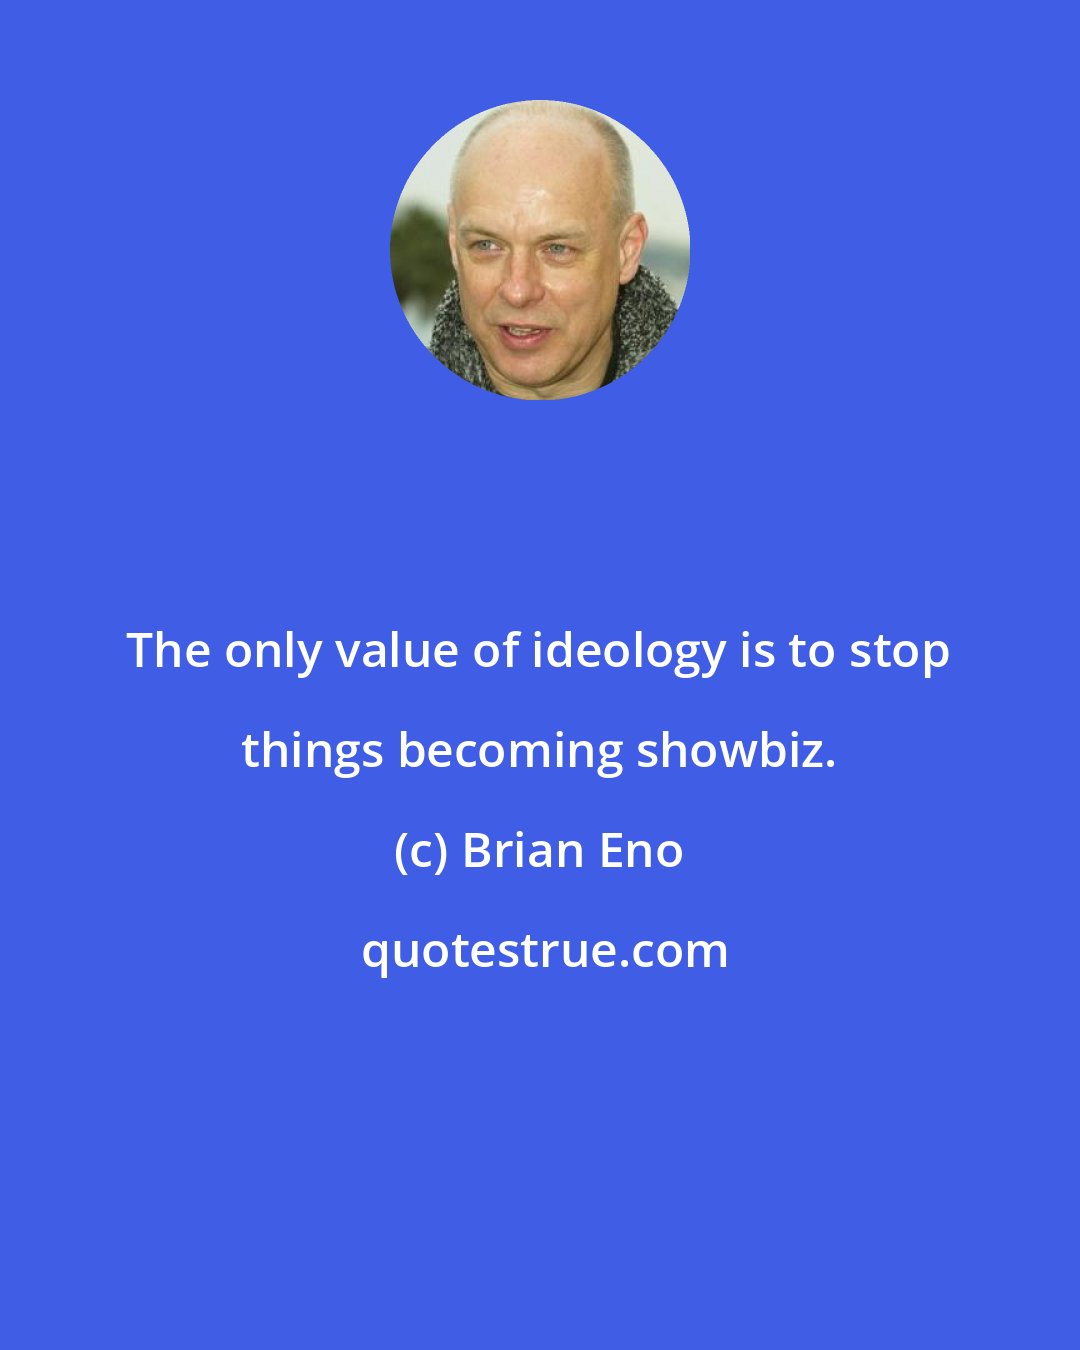 Brian Eno: The only value of ideology is to stop things becoming showbiz.